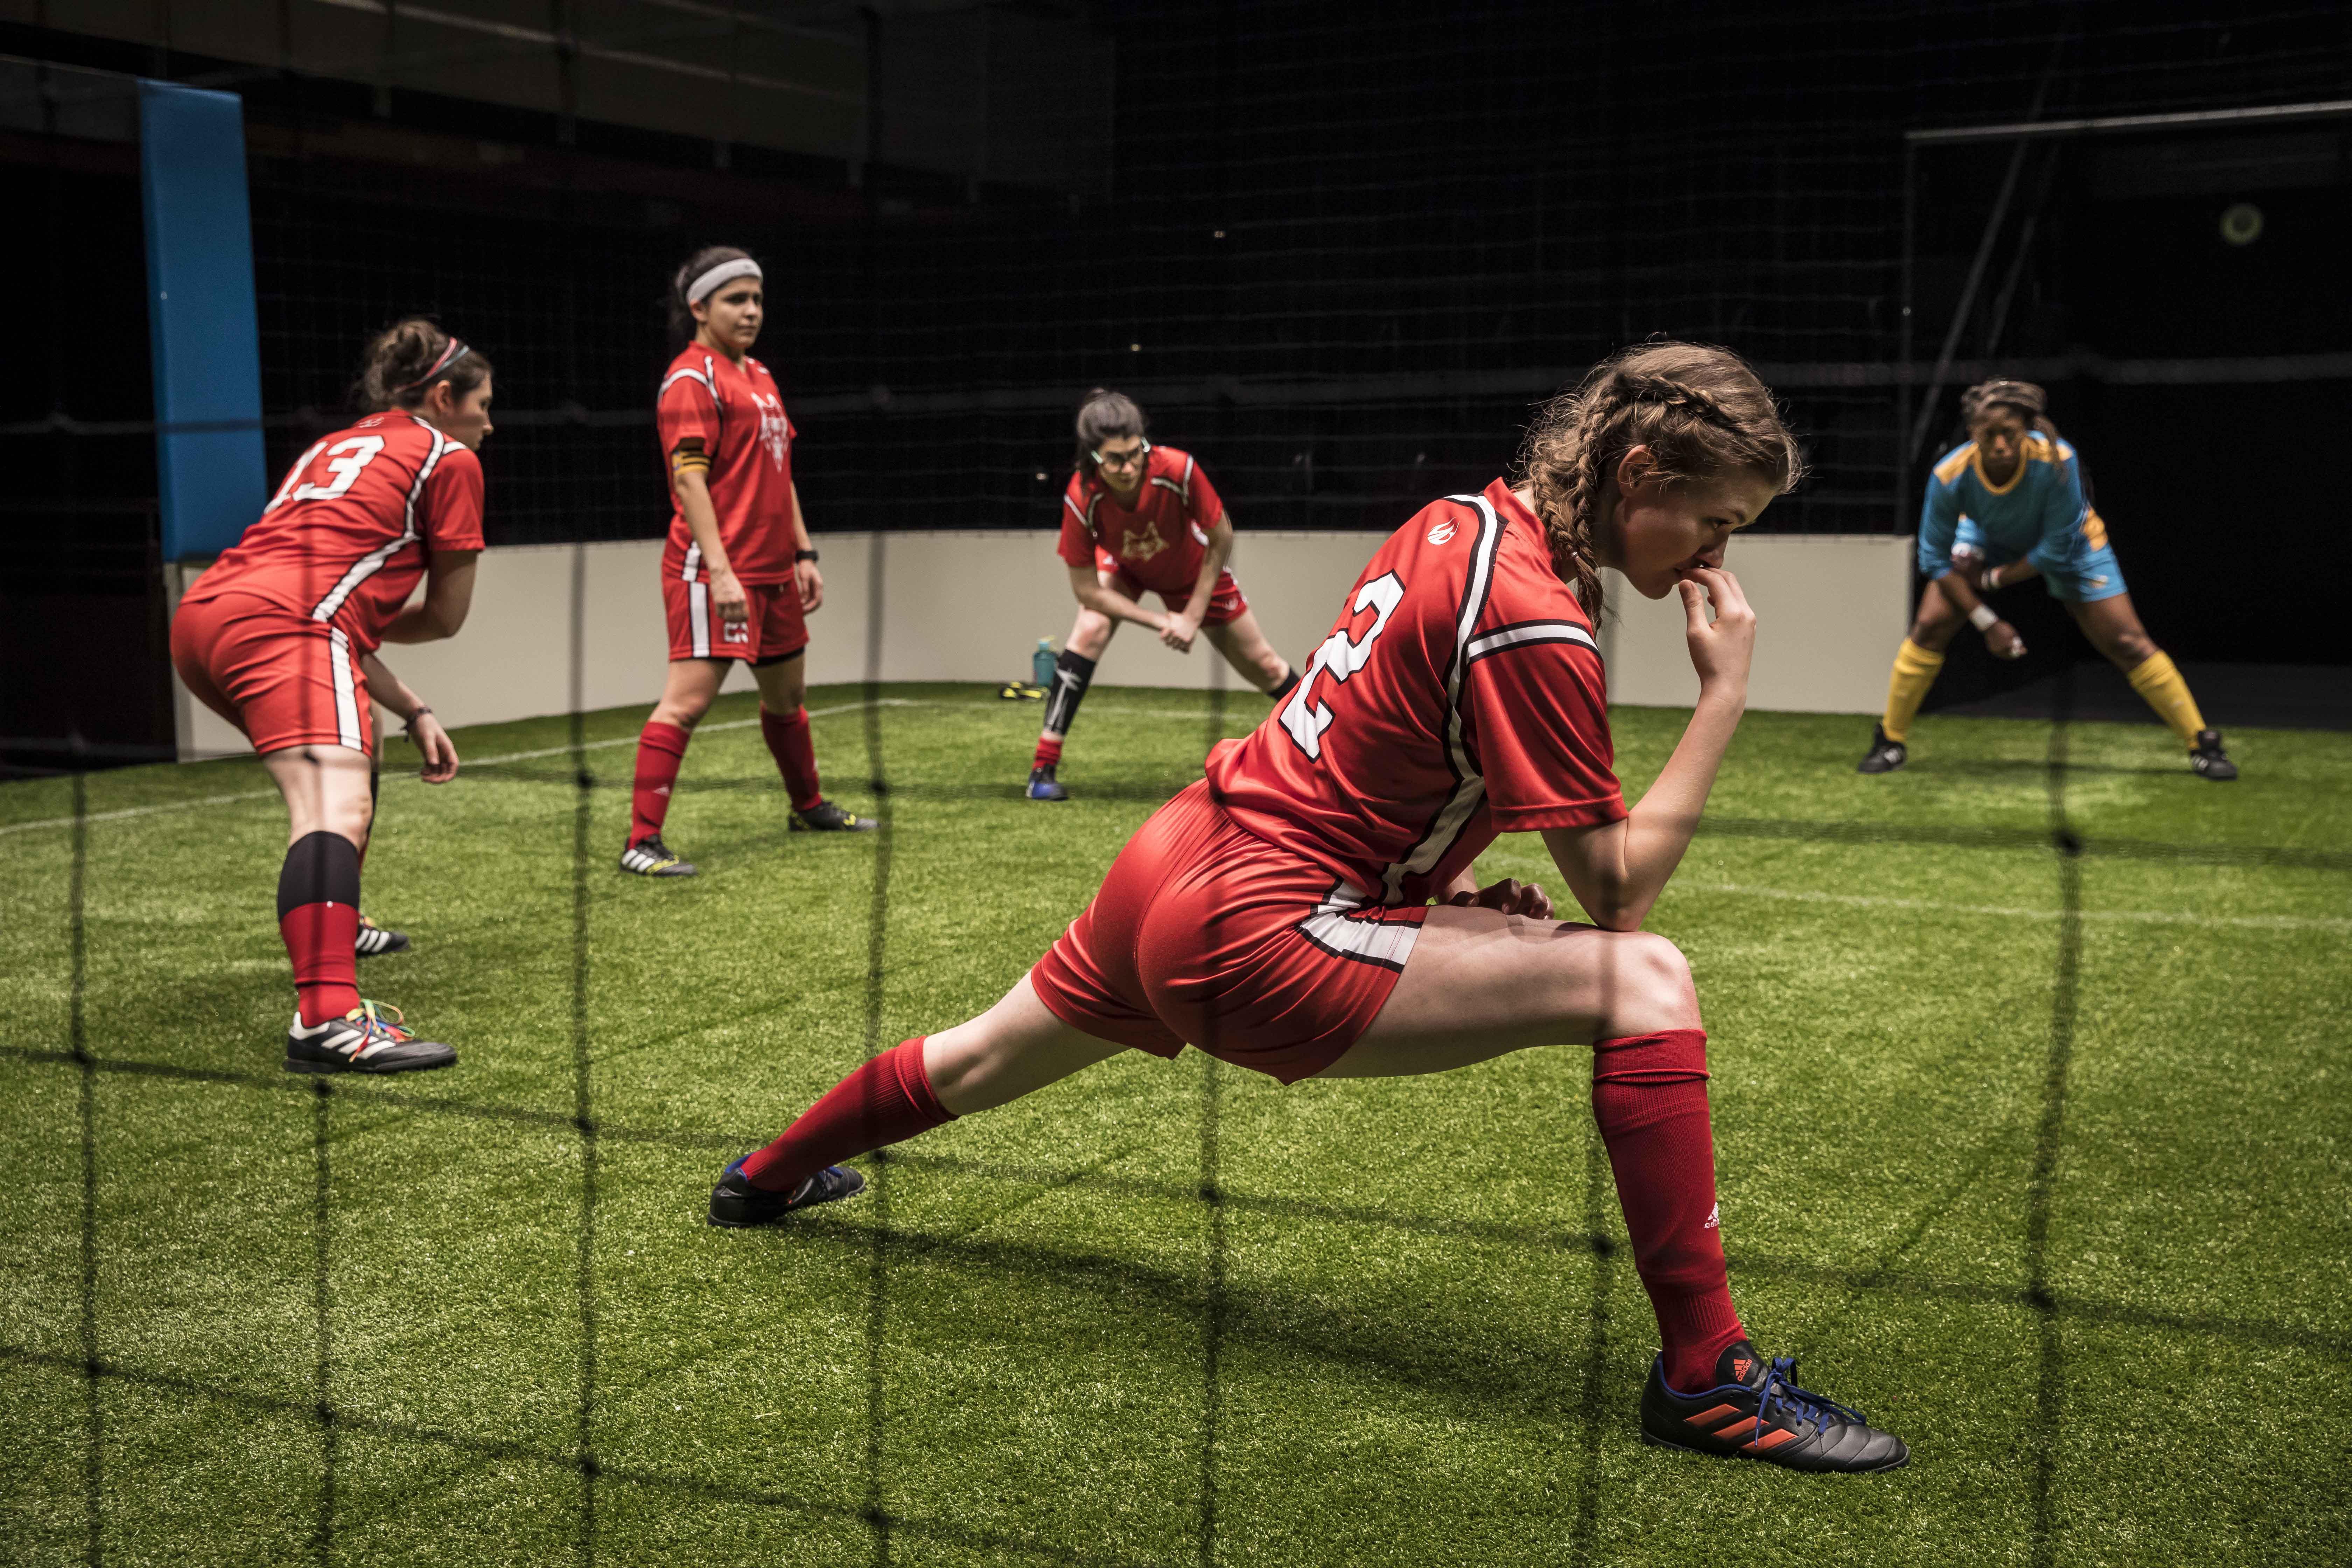 Taylor Blim (No. 2), Mary Tilden (No. 13), Isa Arciniegas (No. 25), Sarah Price (No. 11) and Angela Alise (No. 00) in “The Wolves” at Goodman Theatre. (Credit: Liz Lauren)